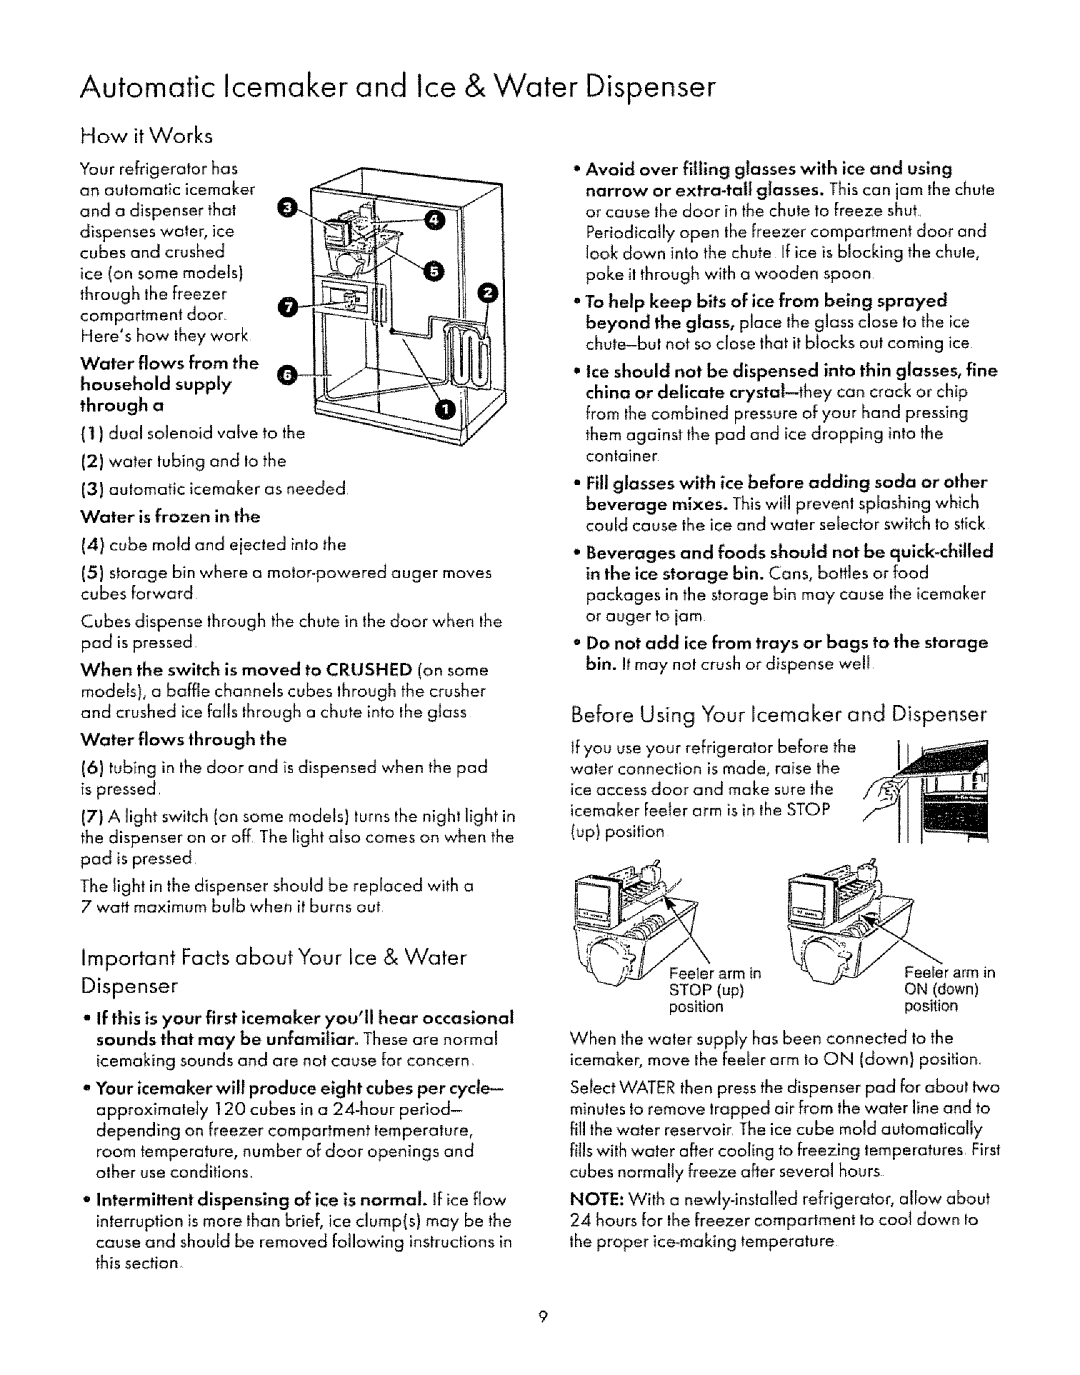 Sears 53472, 57472 Automatic Icemaker and Ice & Water Dispenser, How it Works, Before Using Your Icemaker and Dispenser 